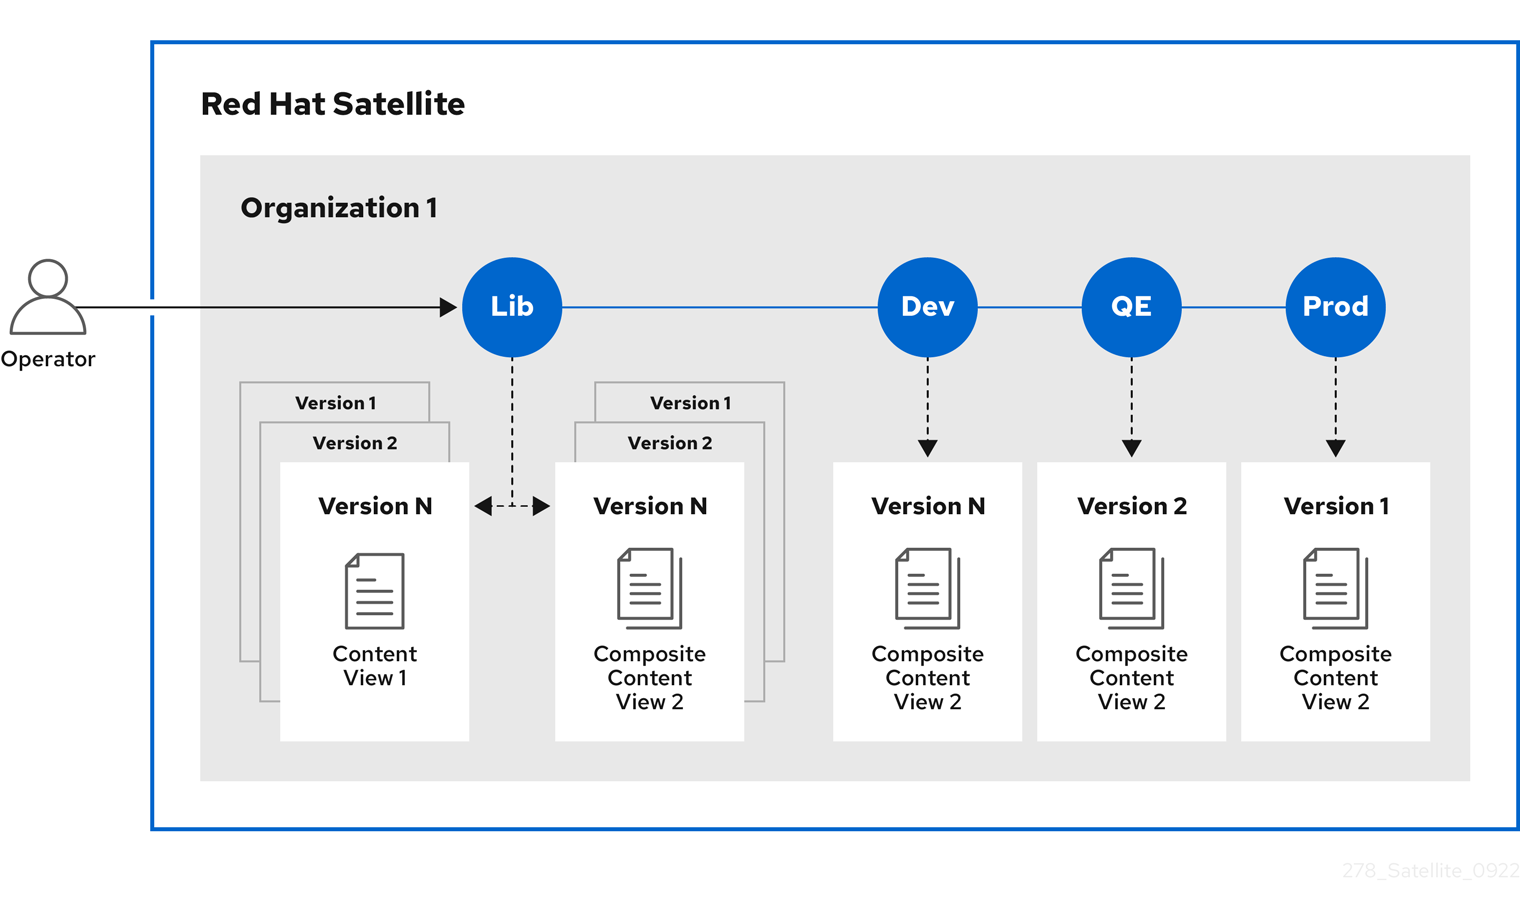 The Satellite Application Life Cycle